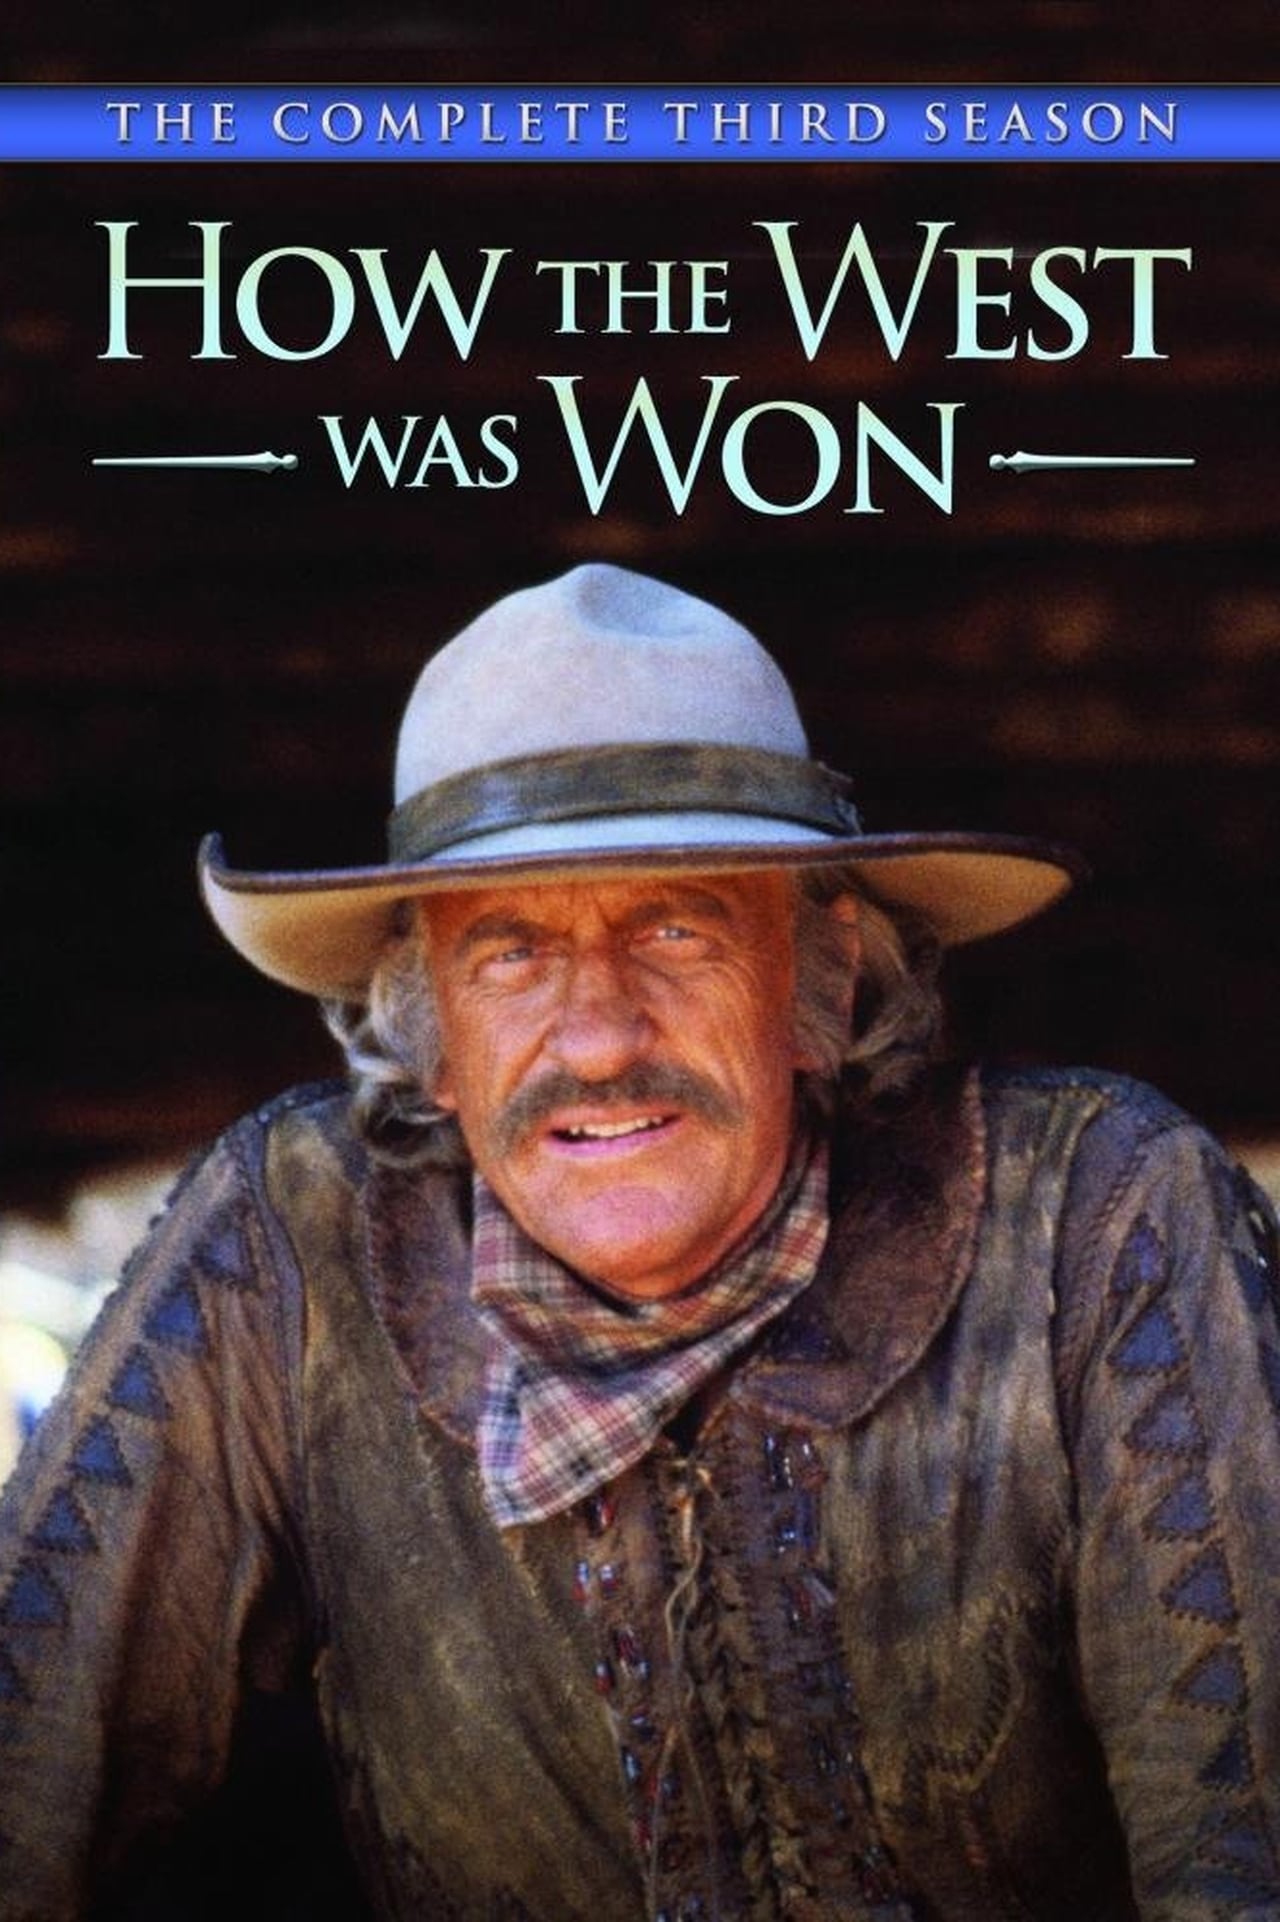 How The West Was Won (1979)